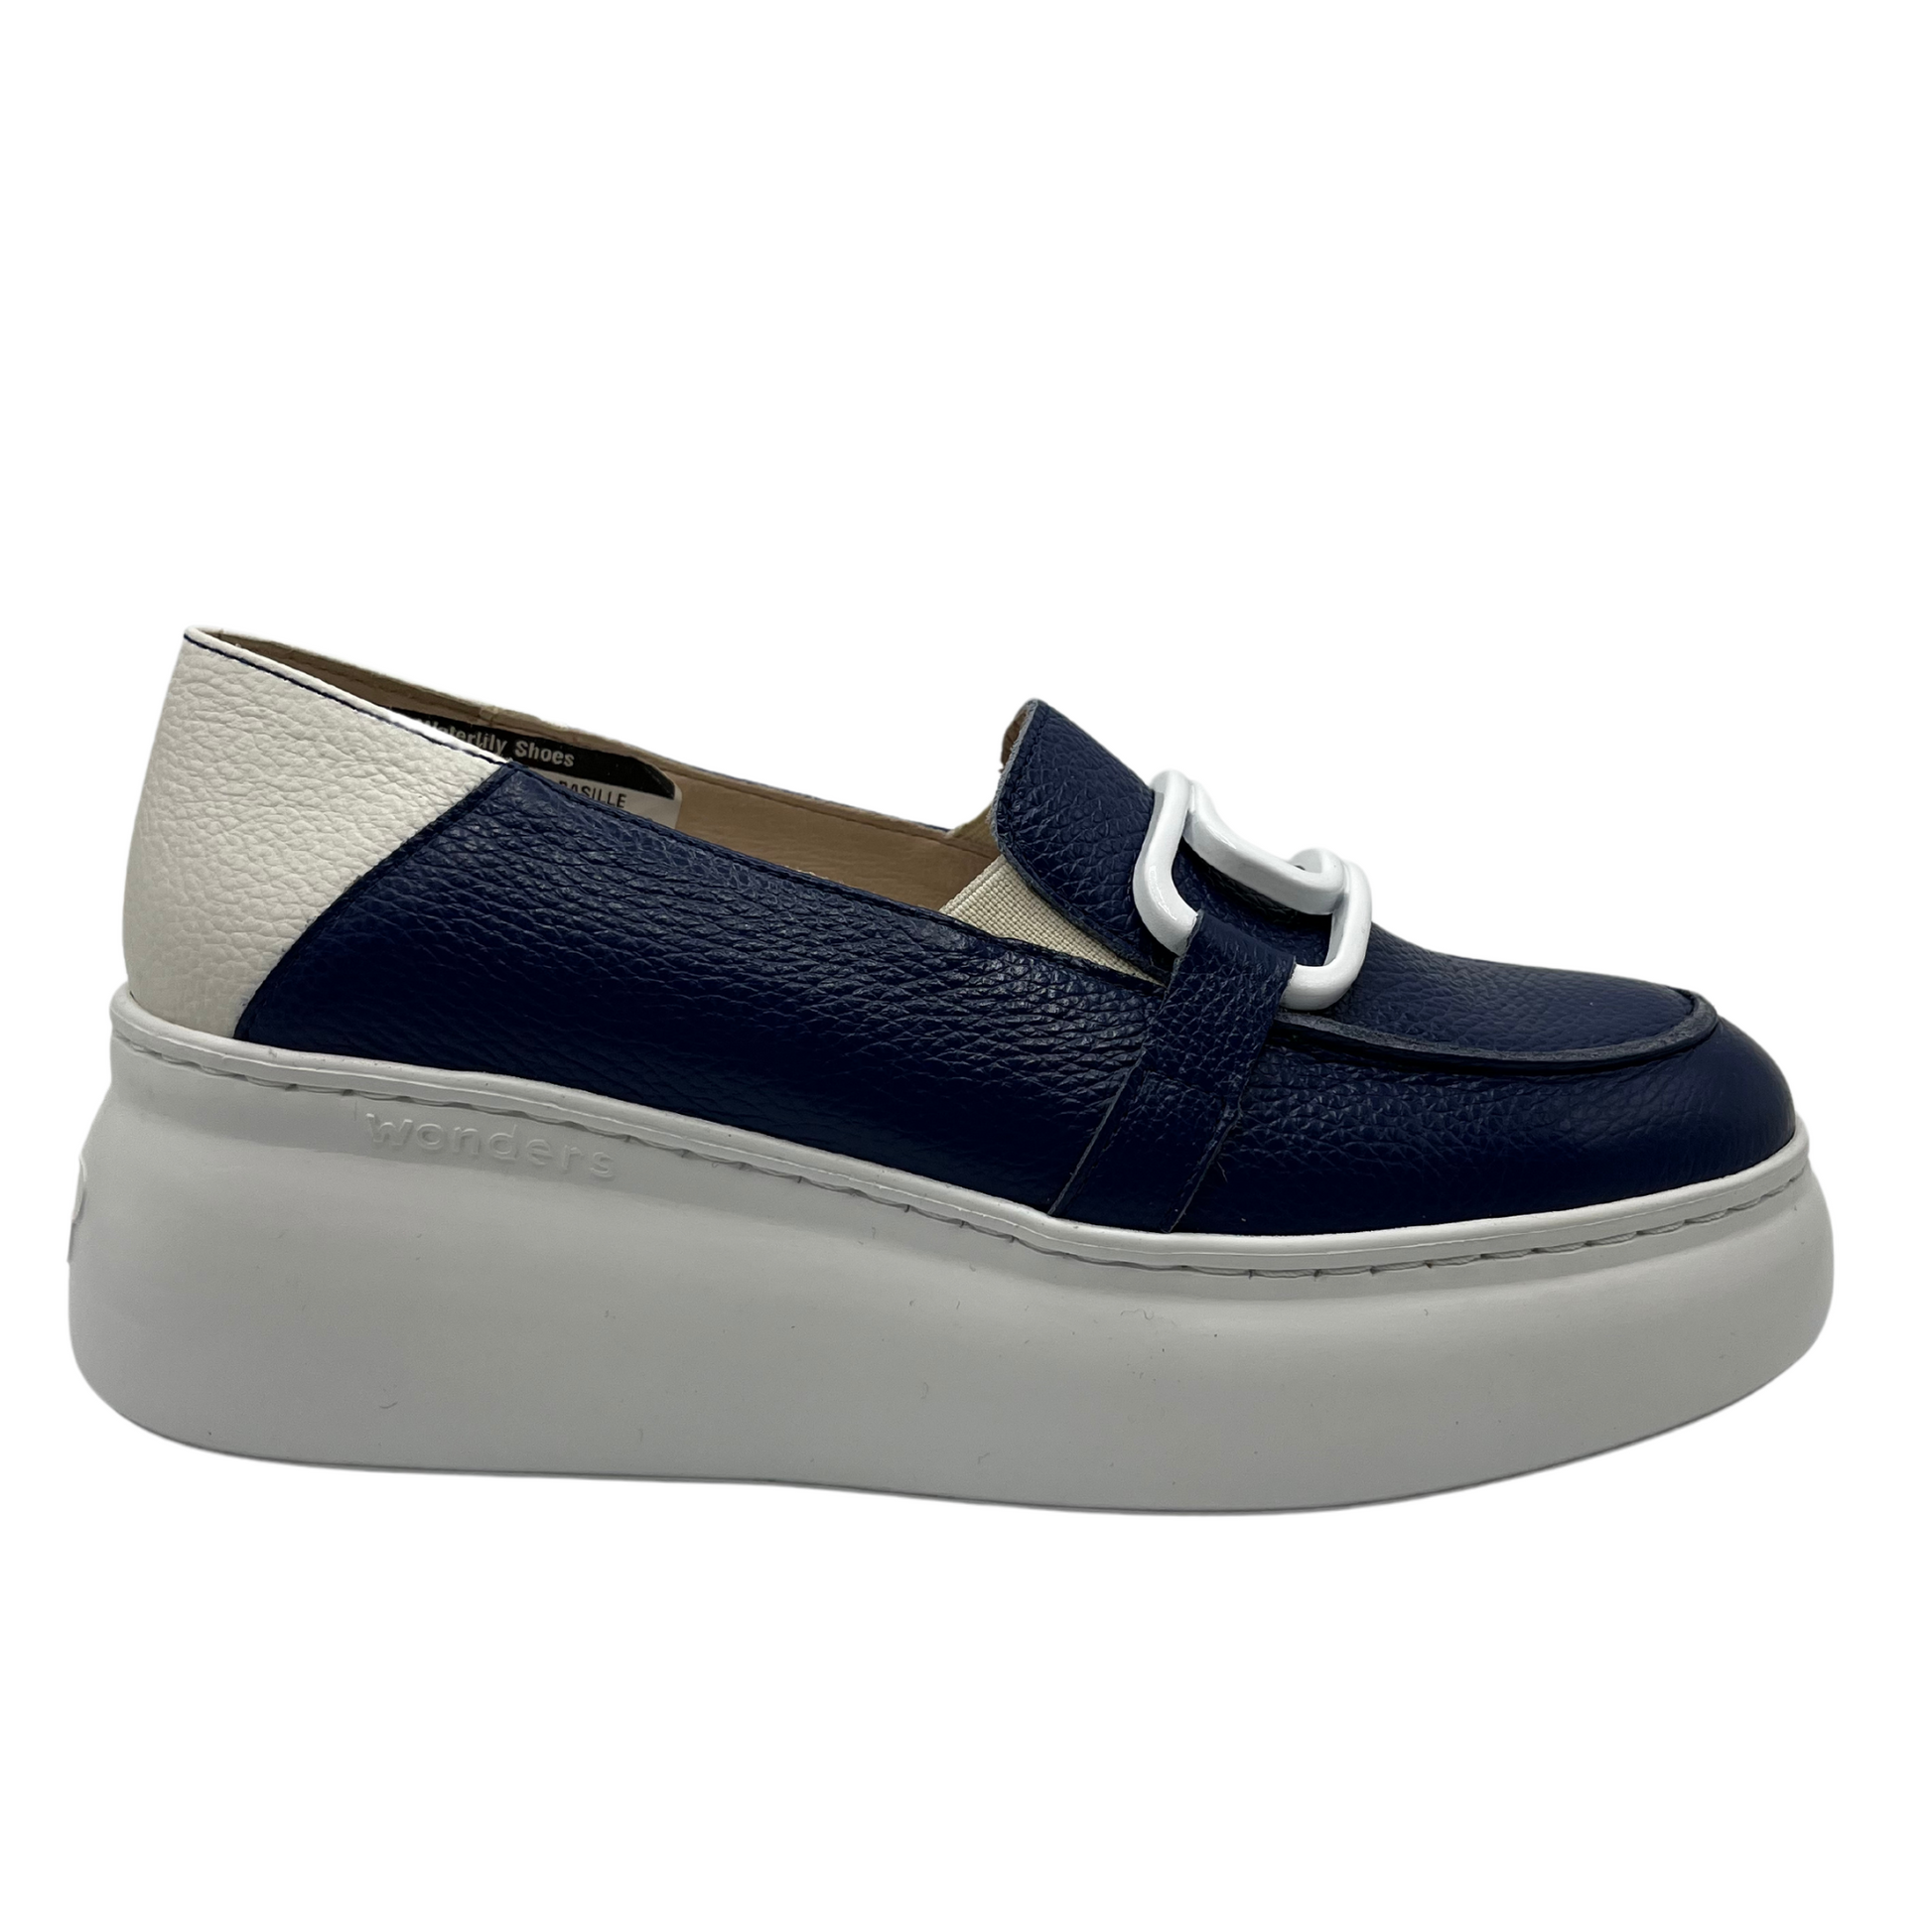 Right facing view of navy and white leather loafer with white rubber platform sole and large white paperclip detail